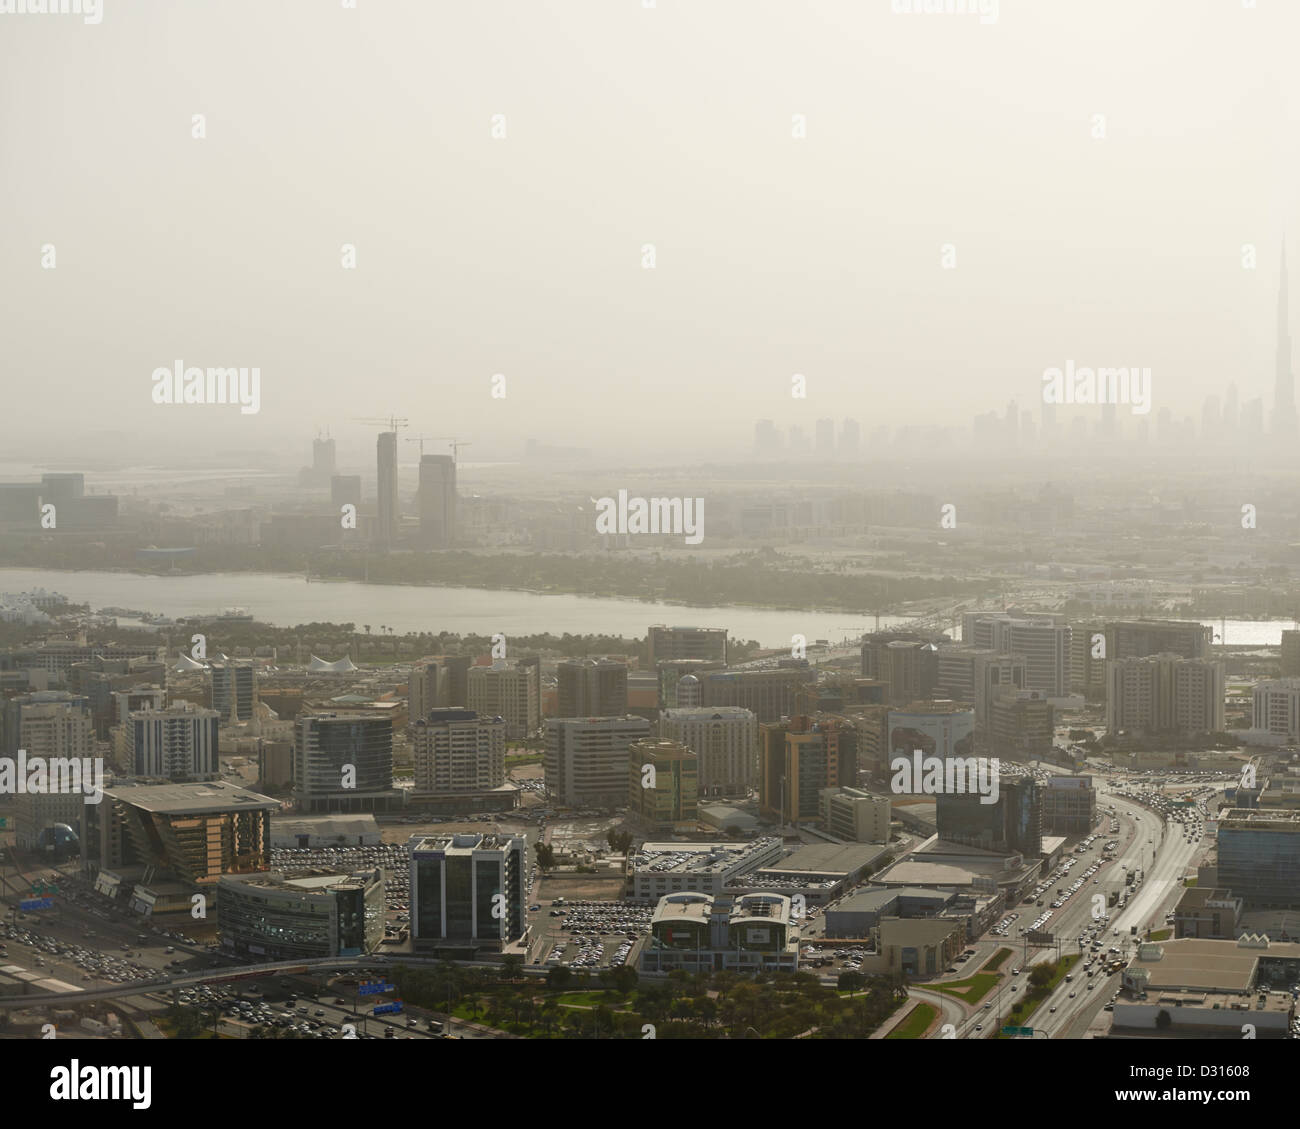 The pollution filled skyline of Dubai, with the towering Burj Khalifa Tower in the distant horizon Stock Photo